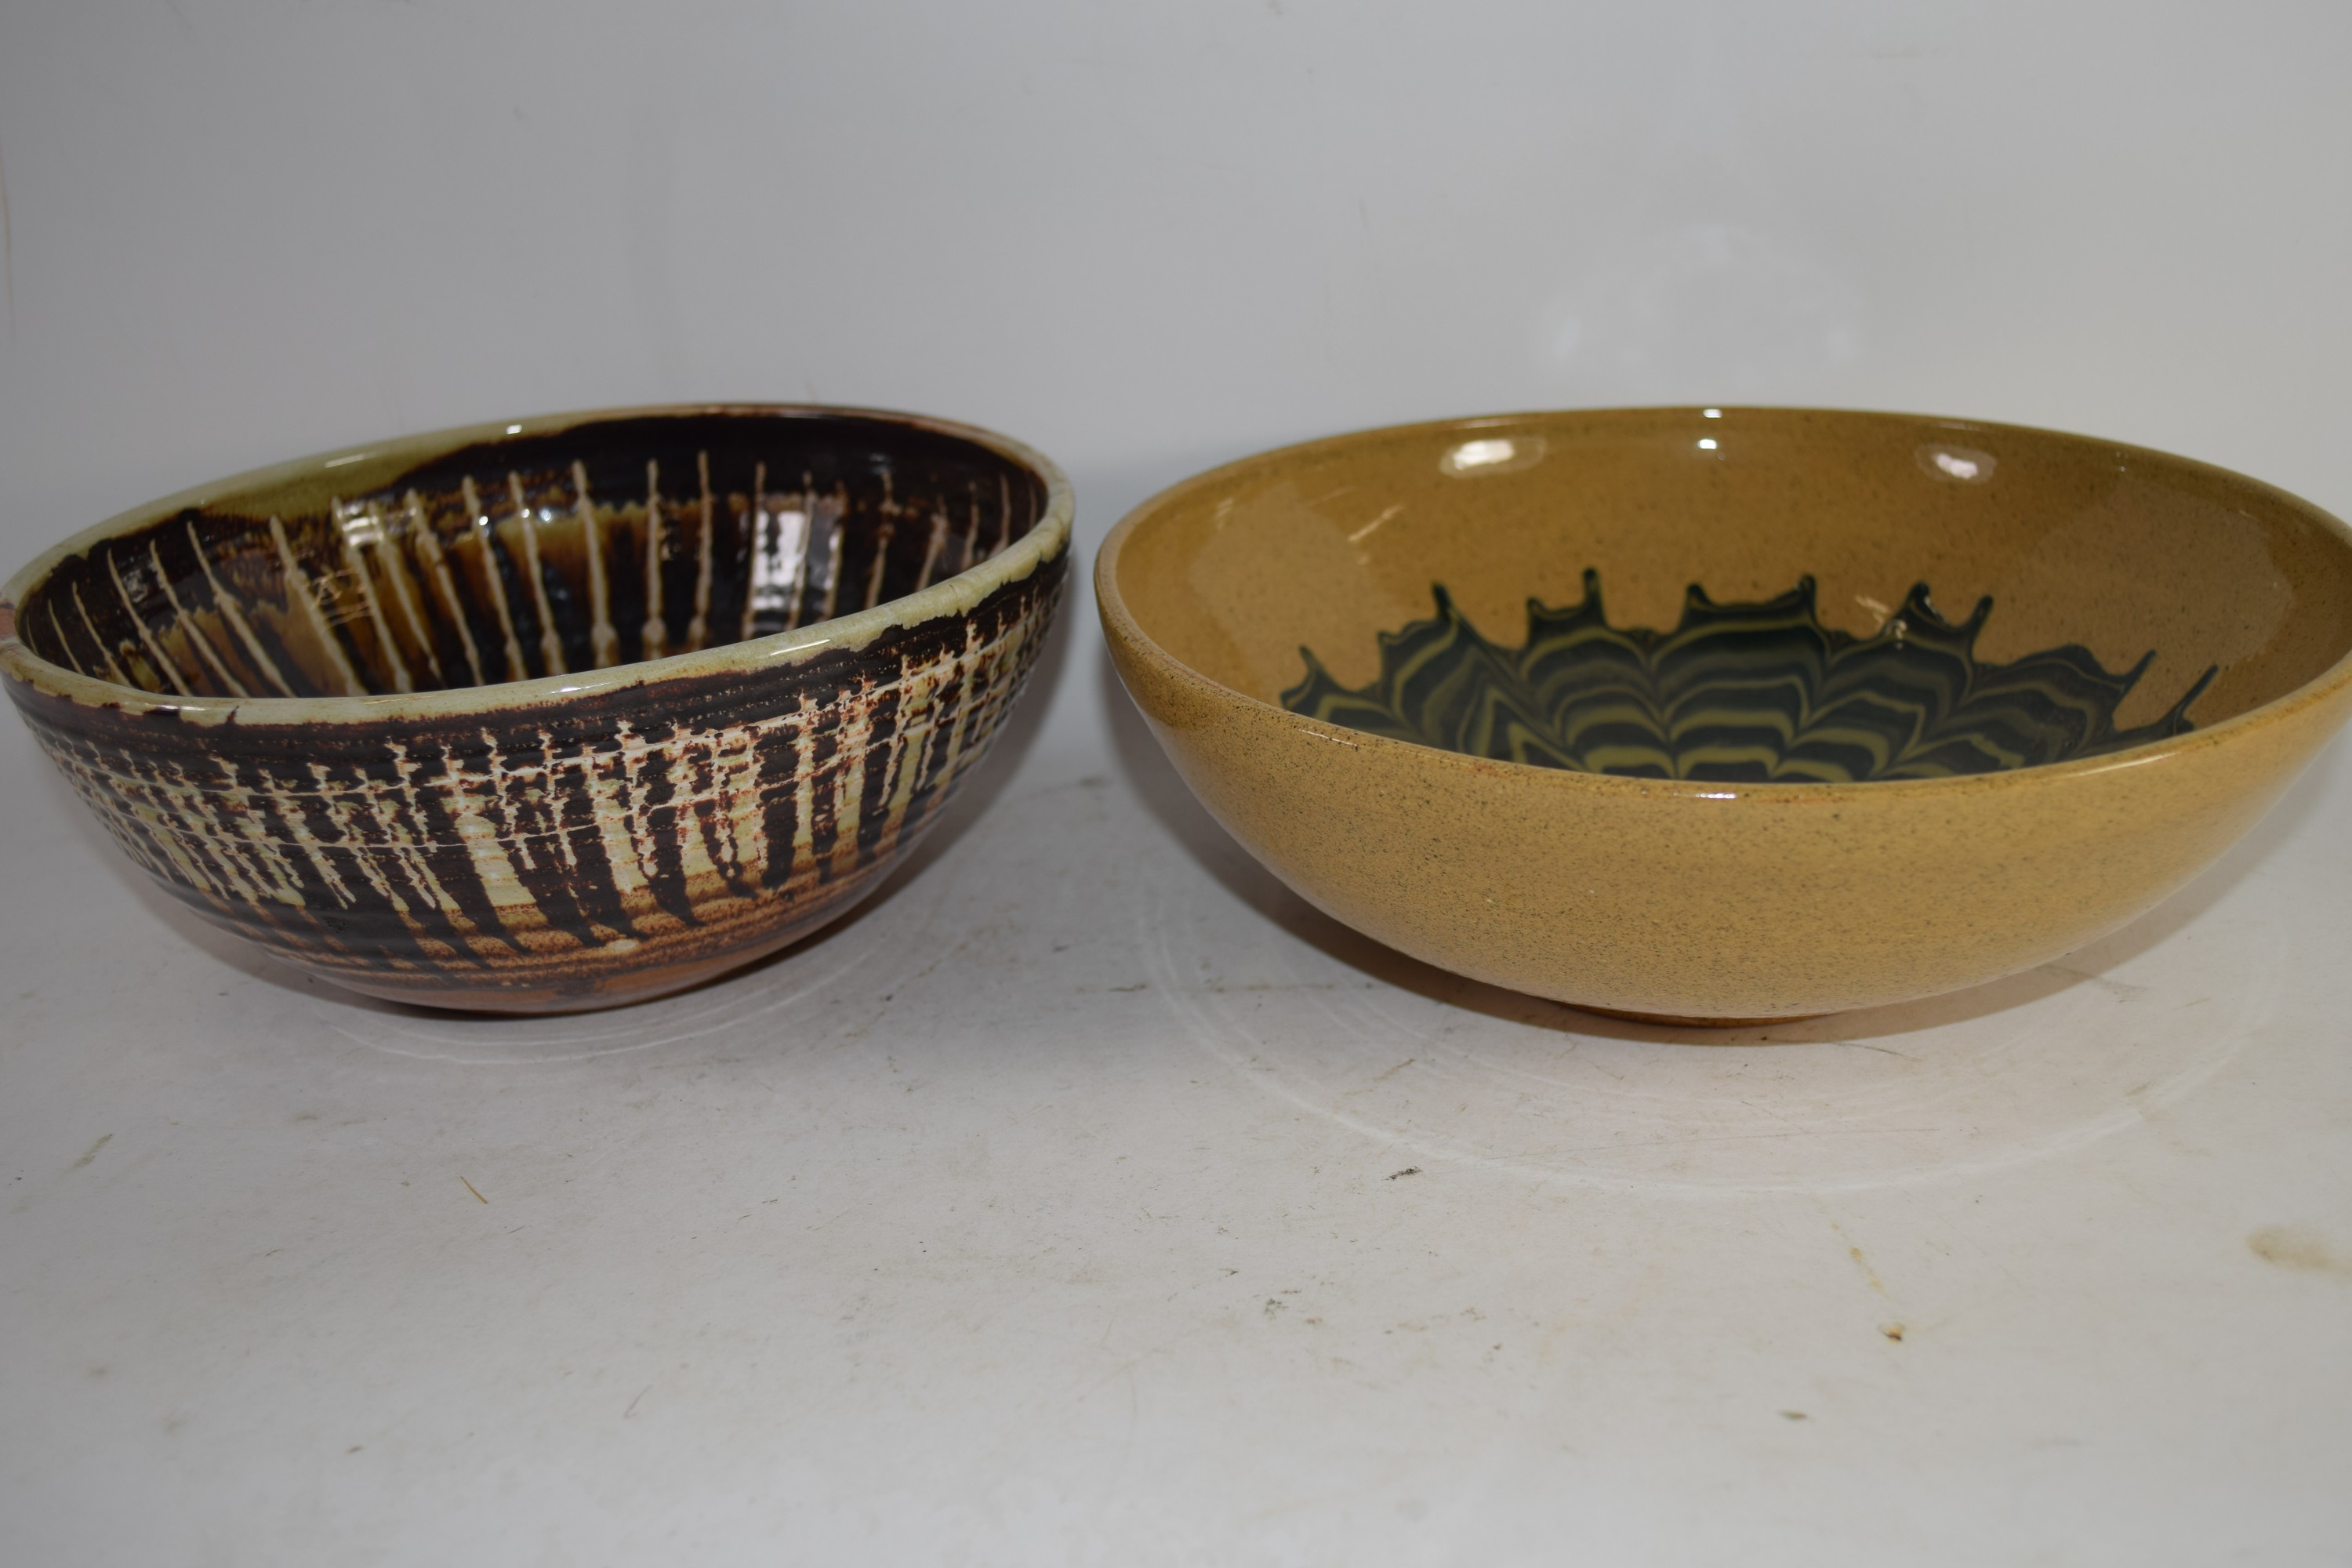 TWO STUDIO POTTERY BOWLS, ONE FROM THE FOREST OF DEAN POTTERY, THE OTHER FROM HOLKHAM - Image 2 of 2